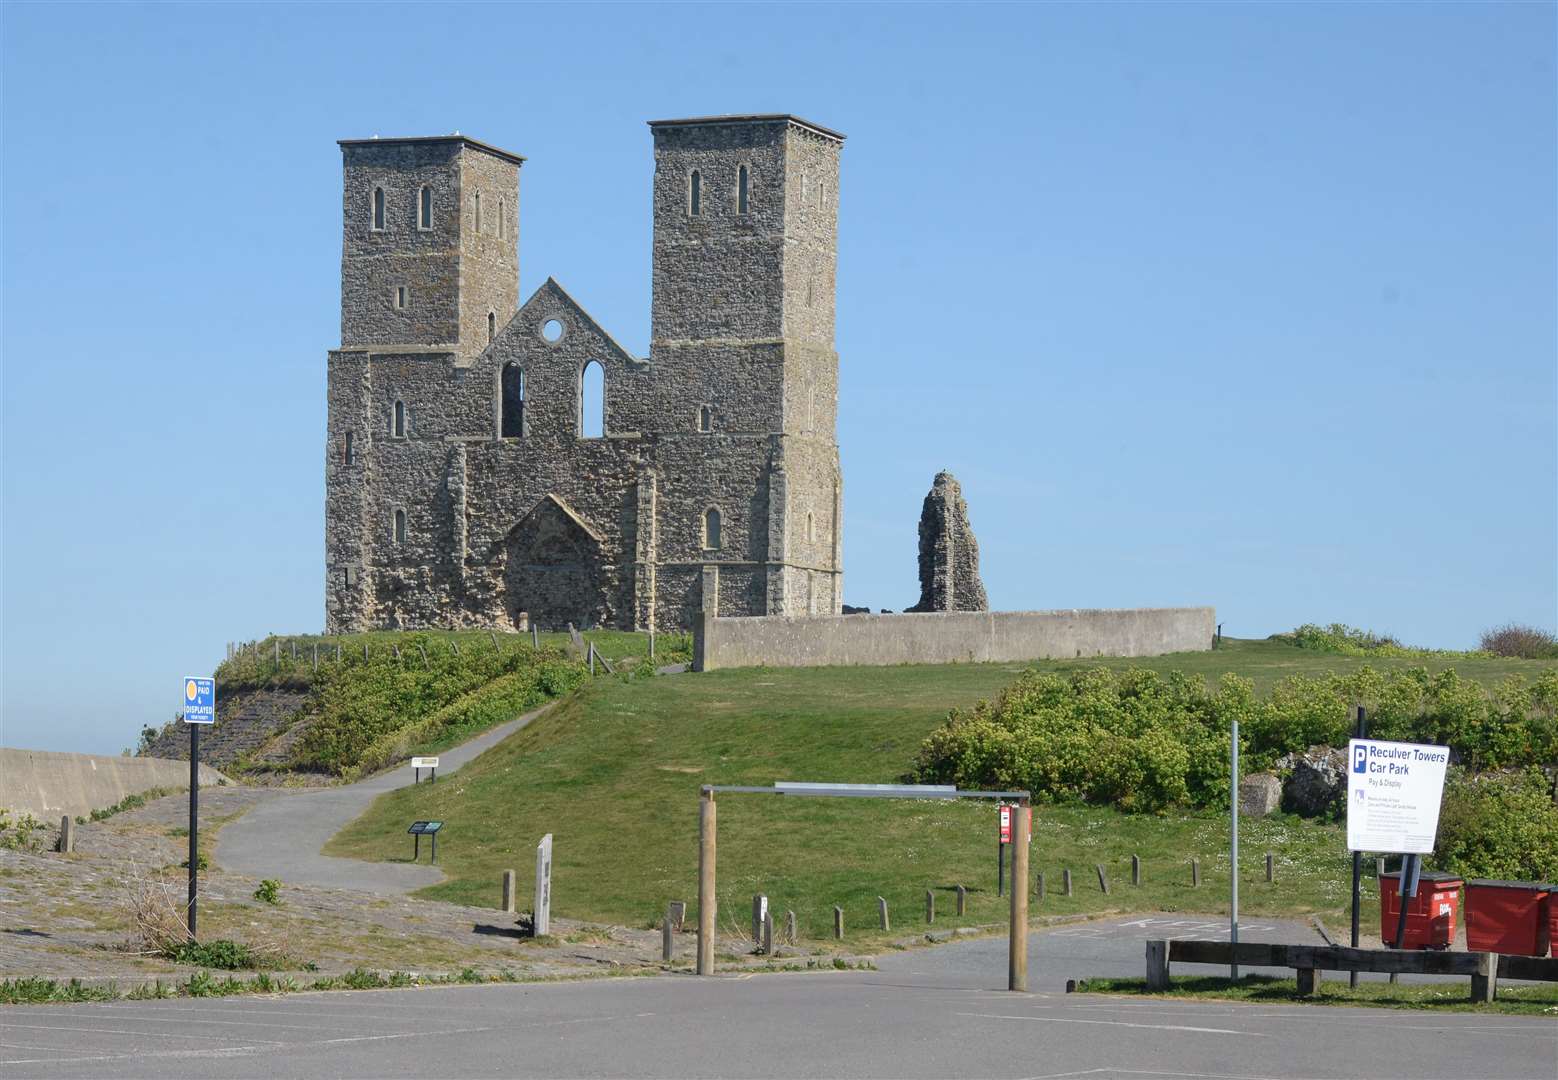 A three-hour stay in the Reculver Towers car park could soon cost £8.10 all year round